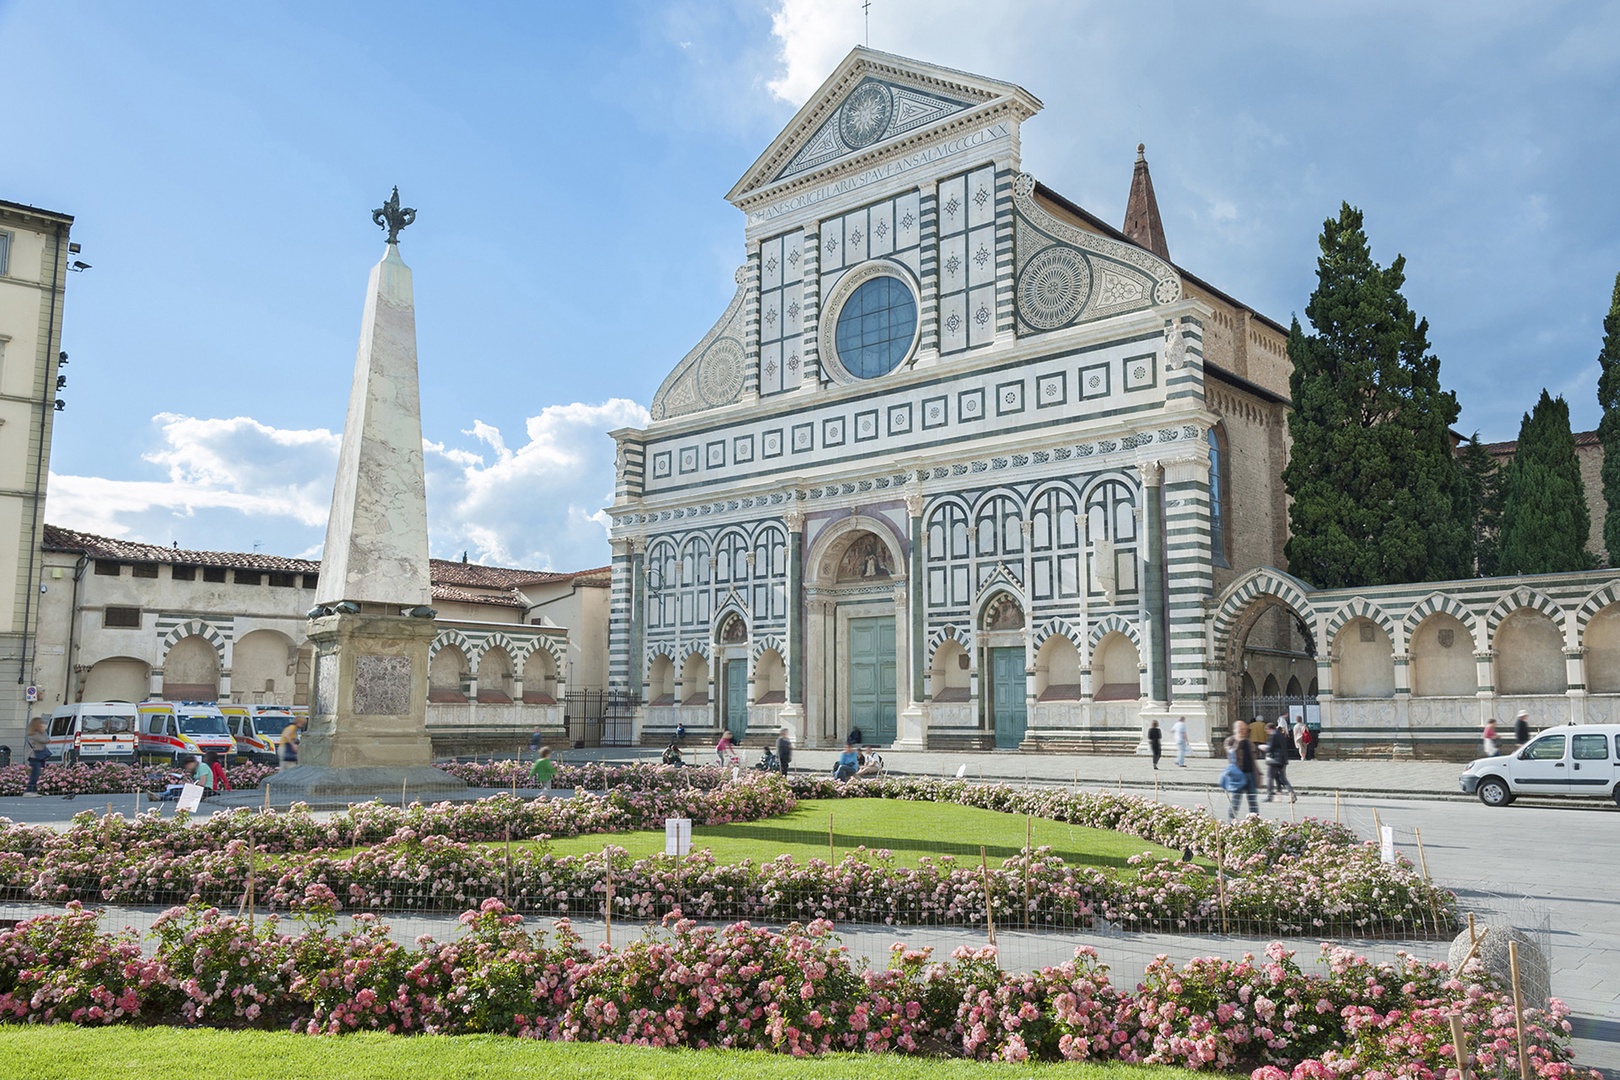 Santa Maria Novella and its piazza are very appealing. The church is a great visit.